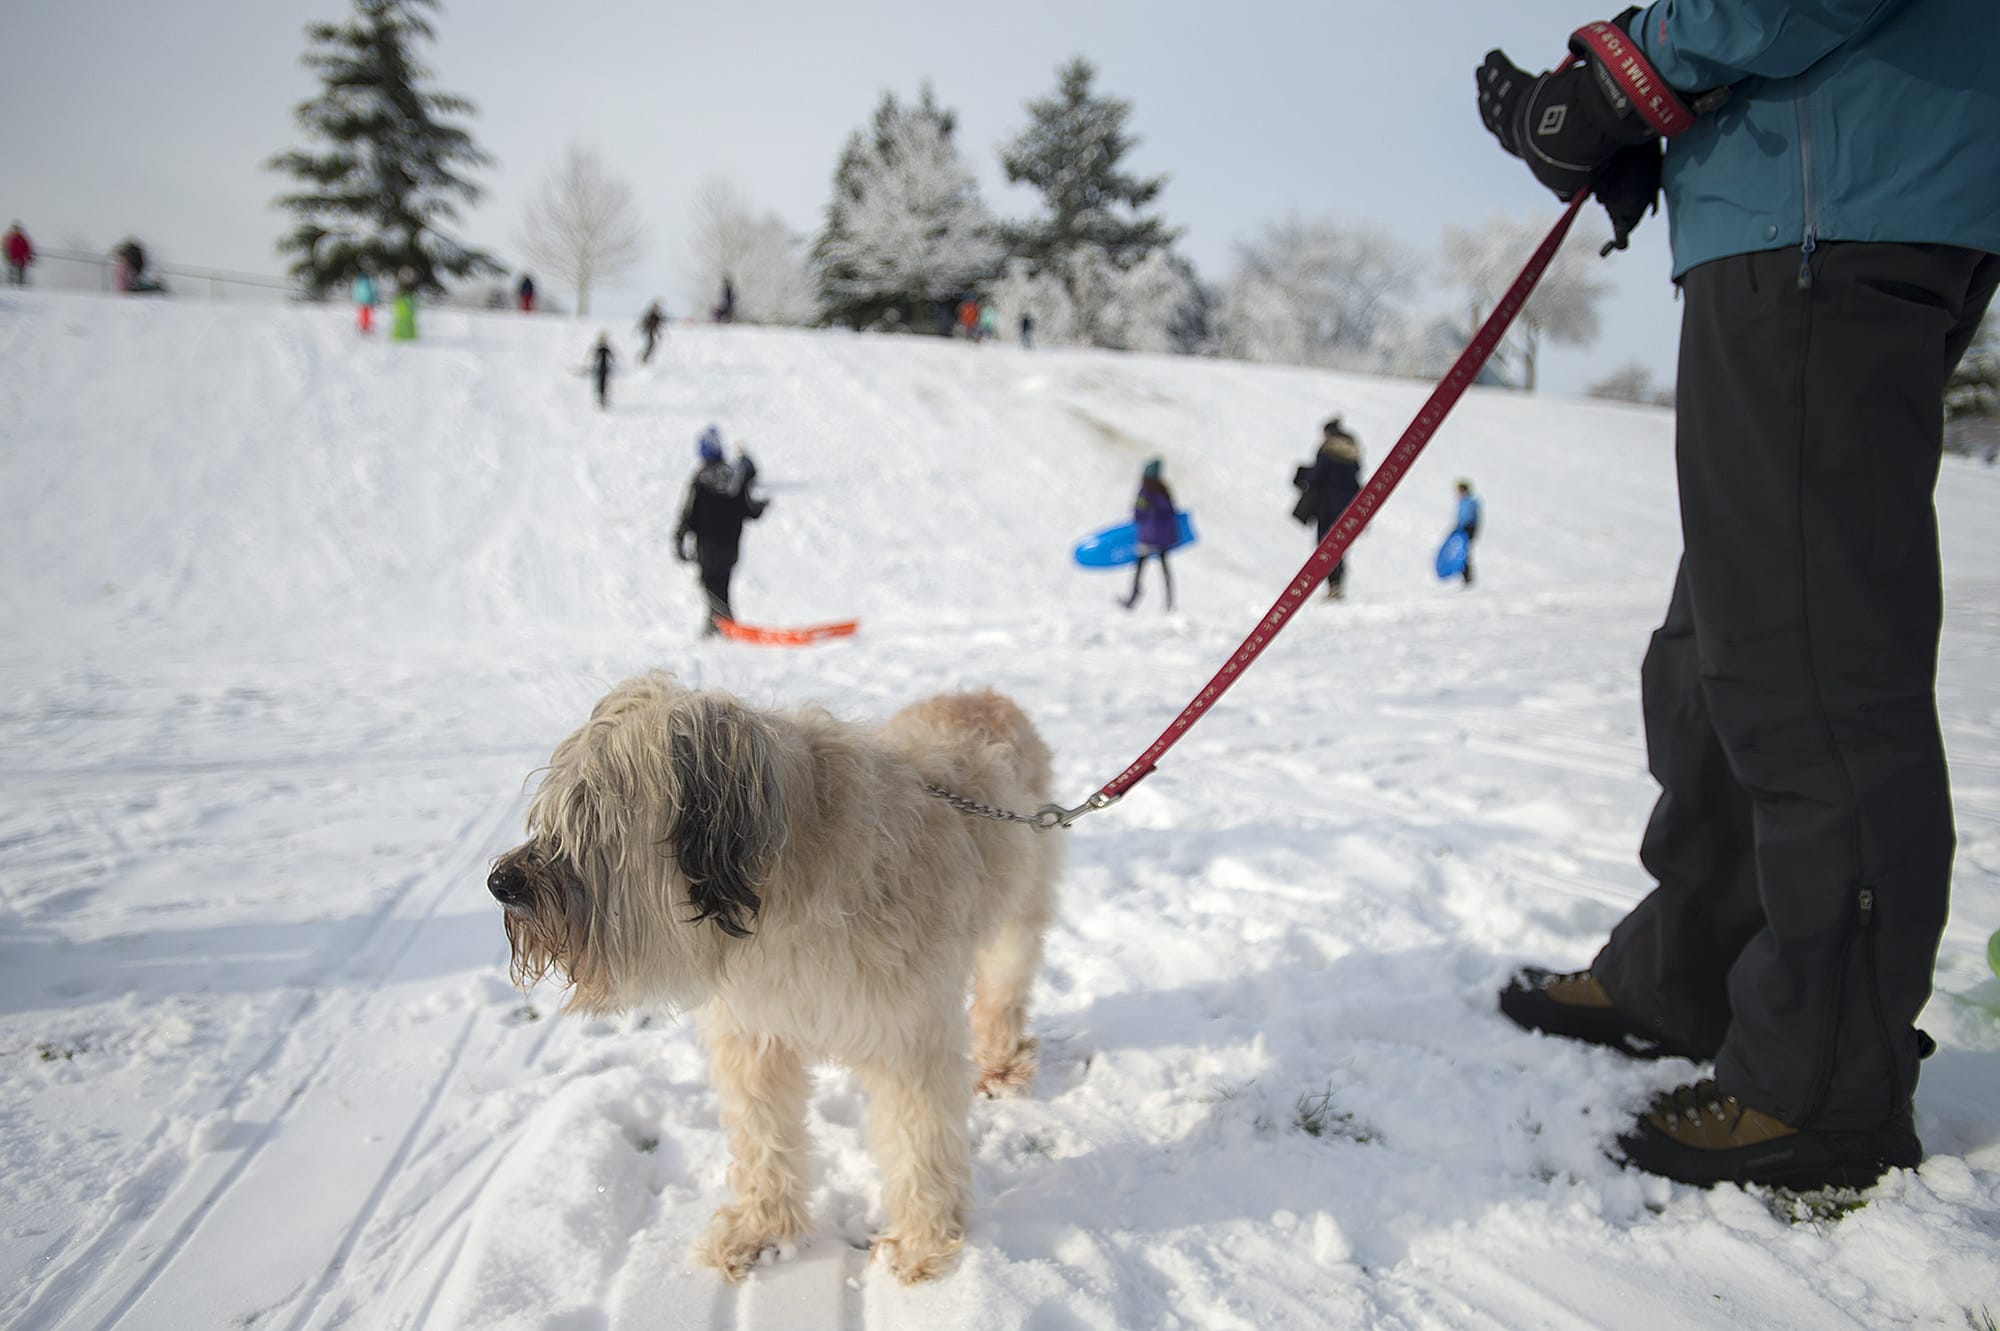 Sydney, an 11-year-old wheaten terrier belonging to Vancouver resident Eric Brende, enjoys the snow day along with kids at Franklin Elementary School on Wednesday morning, Feb. 21, 2018.